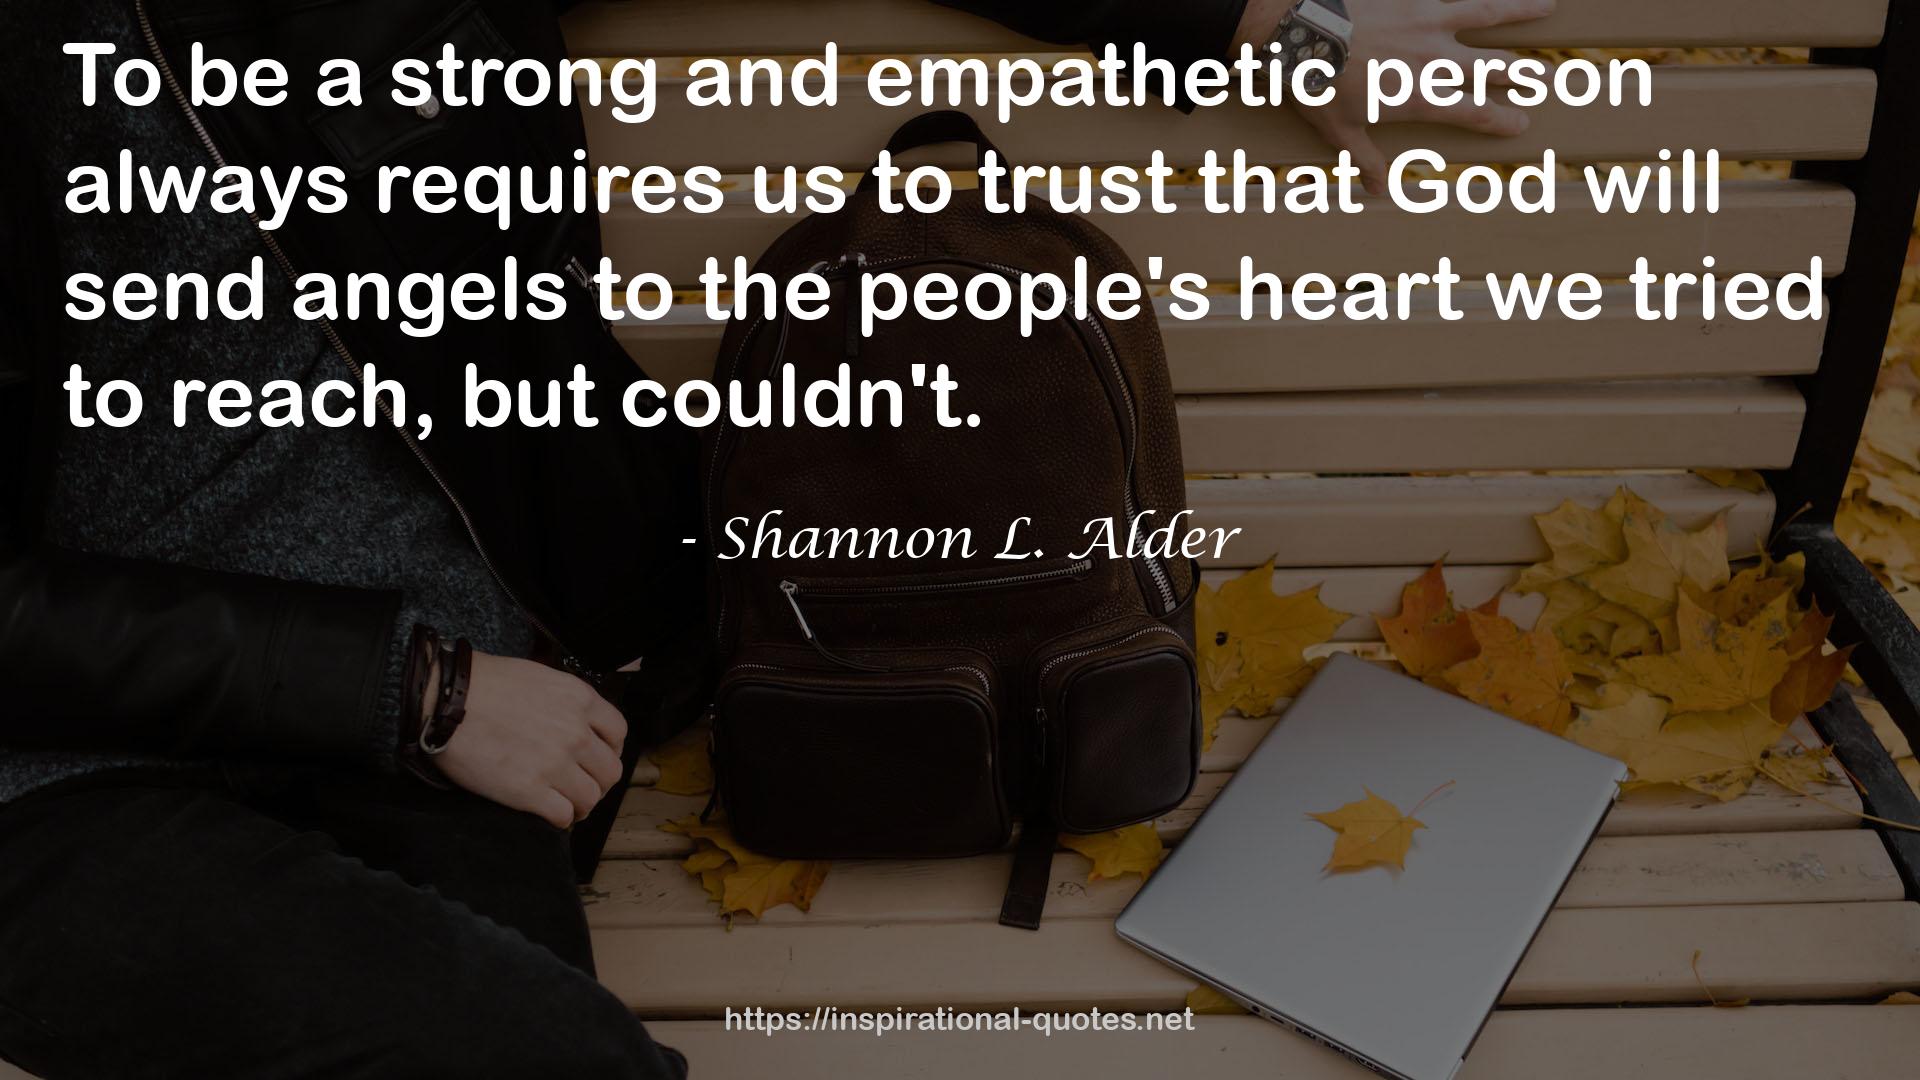 a strong and empathetic person  QUOTES